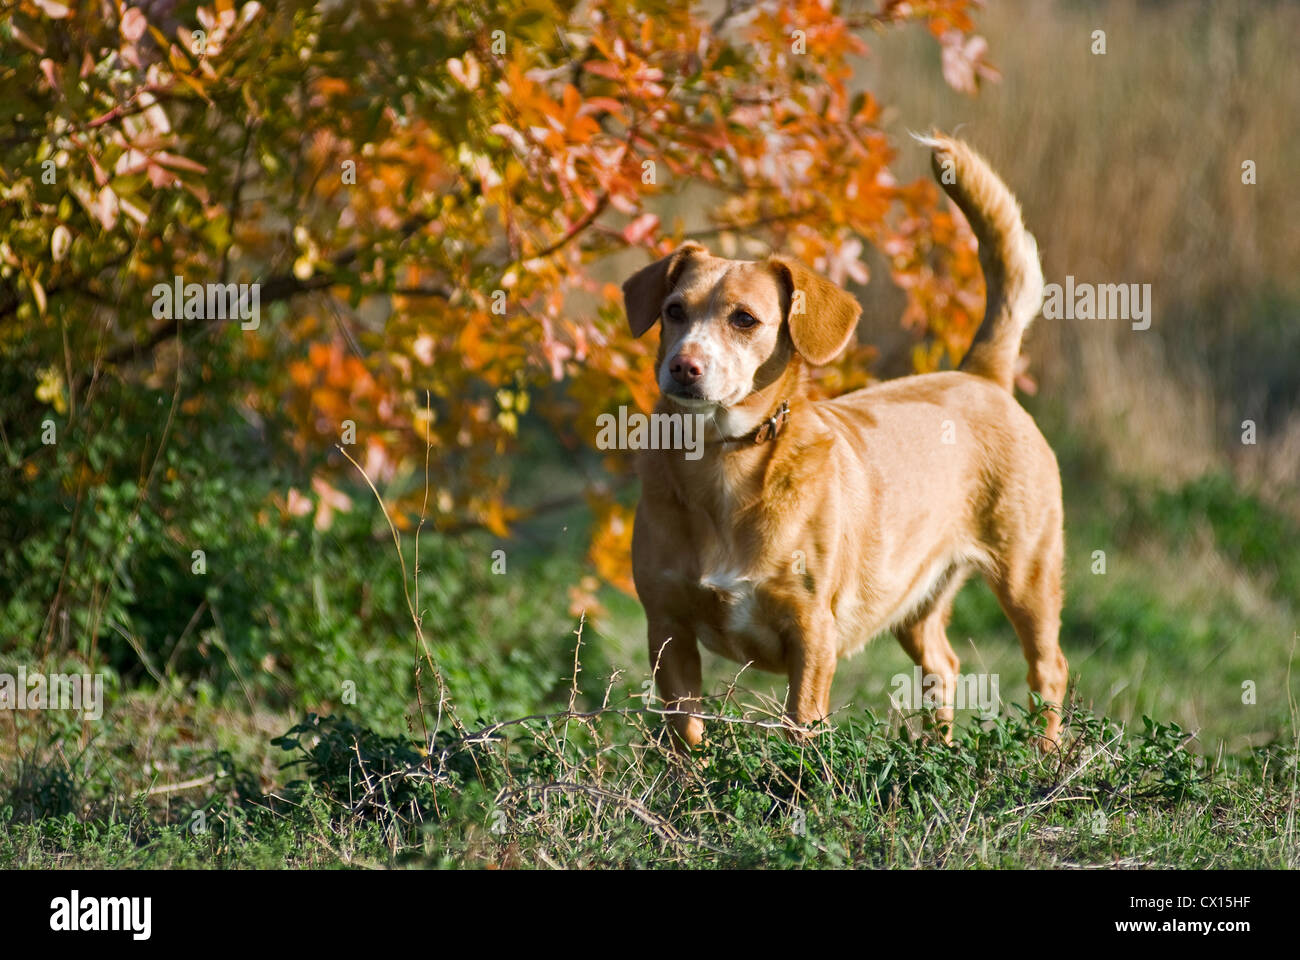 Short-haired dachshund mongrel standing in front of a bush with autumn foliage Stock Photo